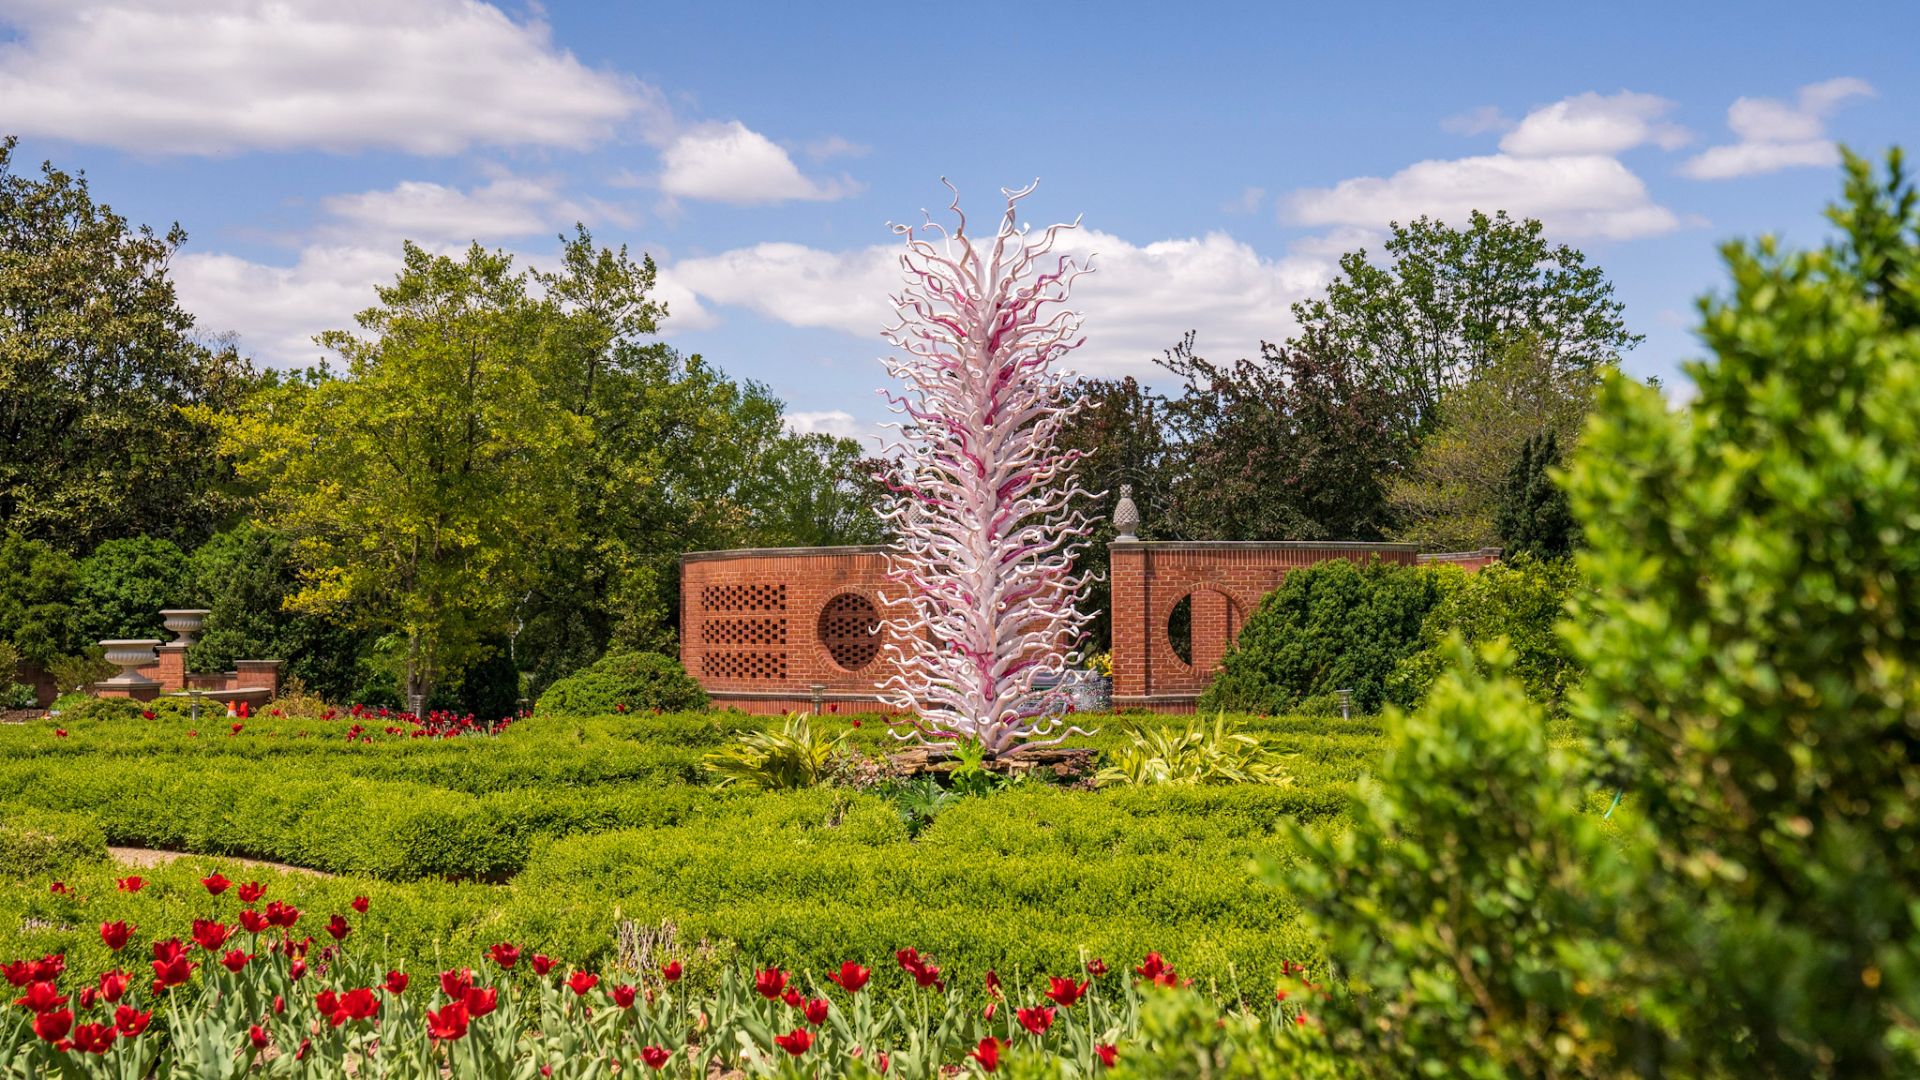 Dale Chihuly’s White Tower with Pink Trumpets is part of the exhibition Chihuly in the Garden 2023.